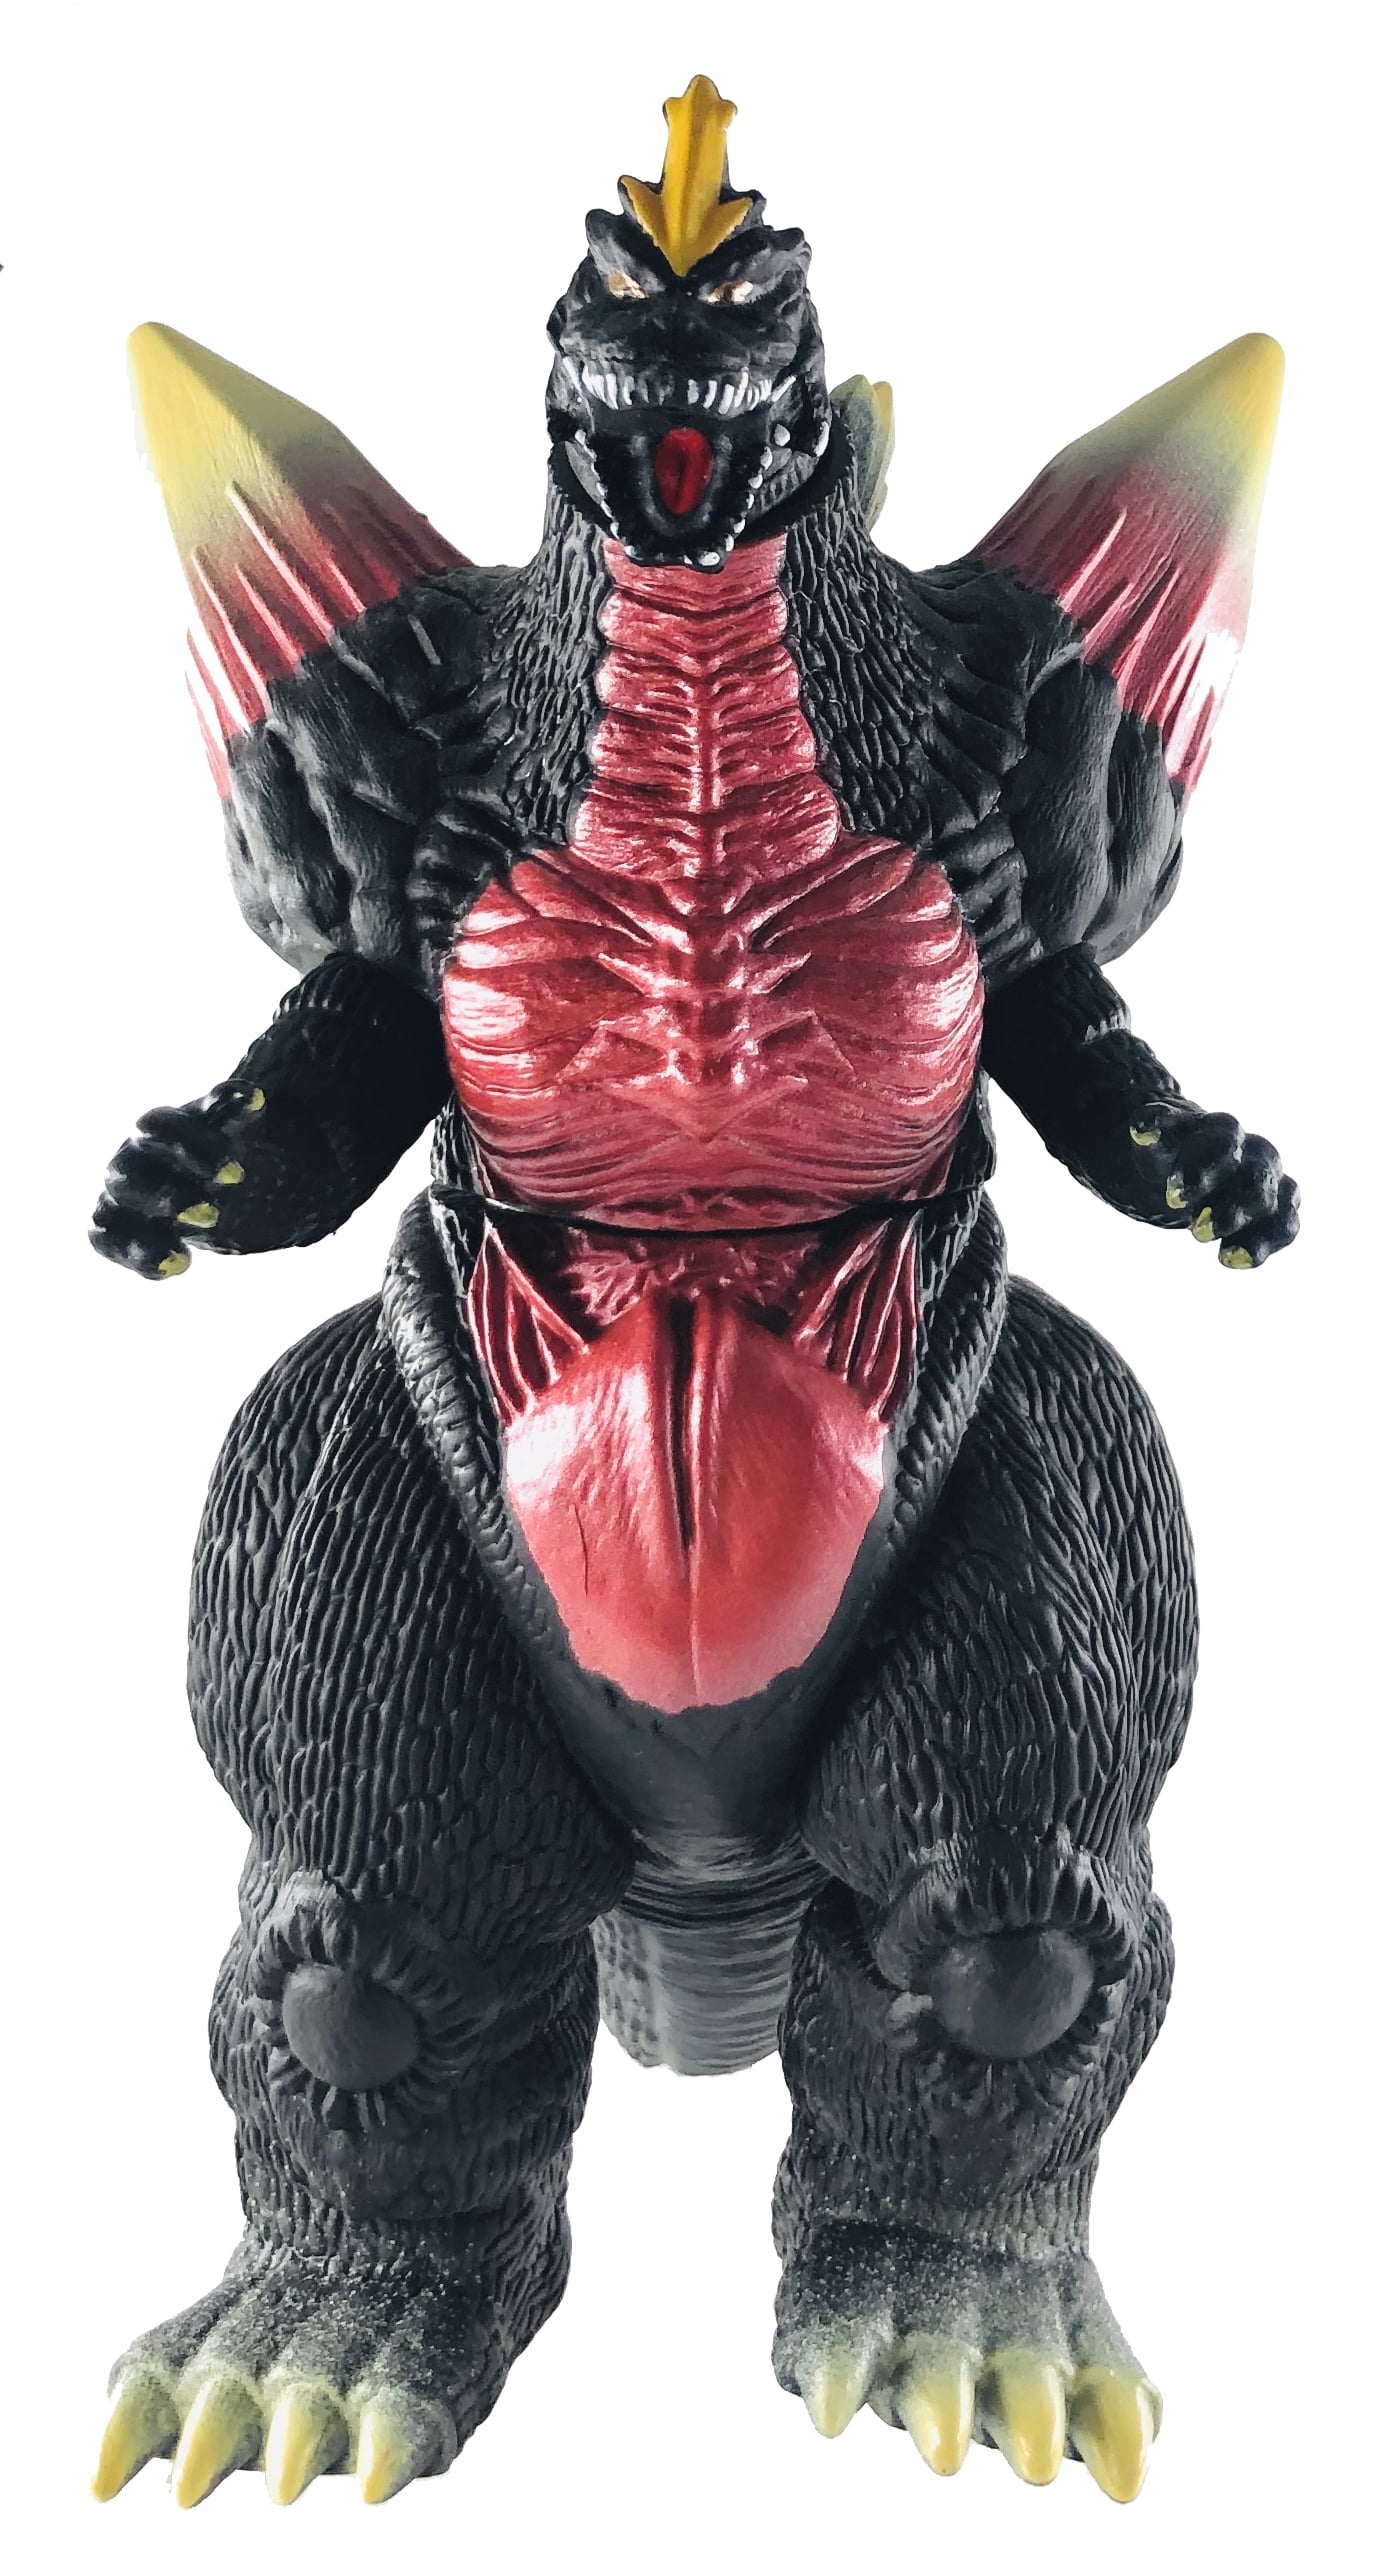 Real Action SpaceGodzilla Bandai Action Figure for sale online 